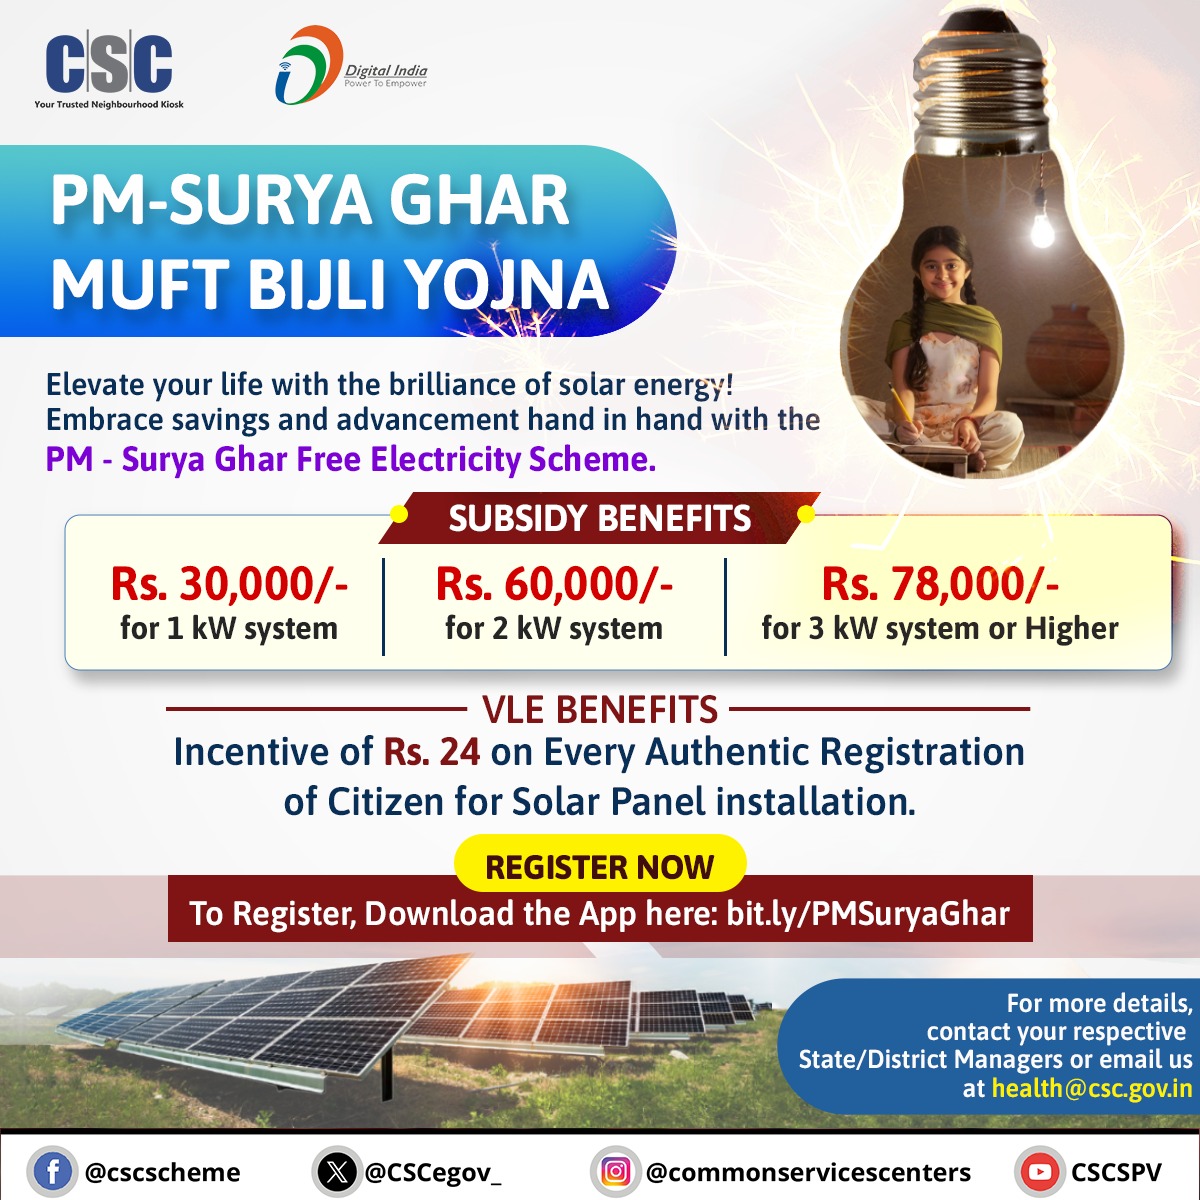 Hon'ble PM Shri @narendramodi's initiative to provide #FreeElectricity to households in India: #PMSuryaGhar Muft Bijli Yojana! ₹24 #incentive for every authentic registration To Register, download the app: bit.ly/PMSuryaGhar For queries, contact health@csc.gov.in